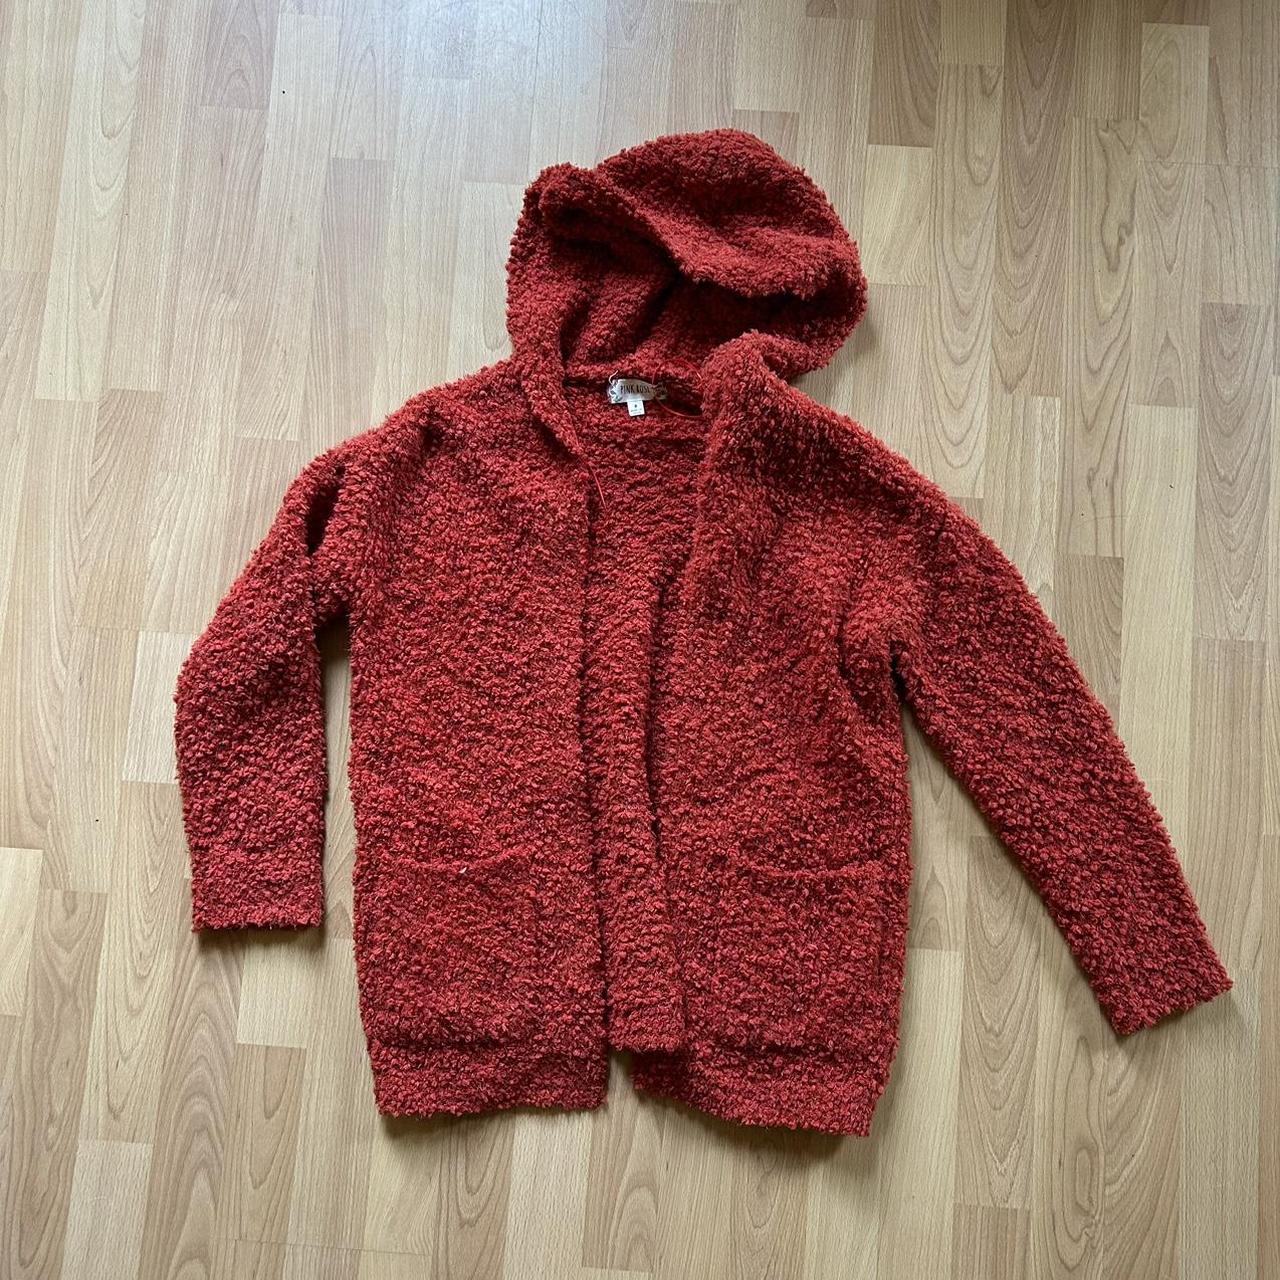 Red fuzzy pile cardigan ️says size small but has an... - Depop